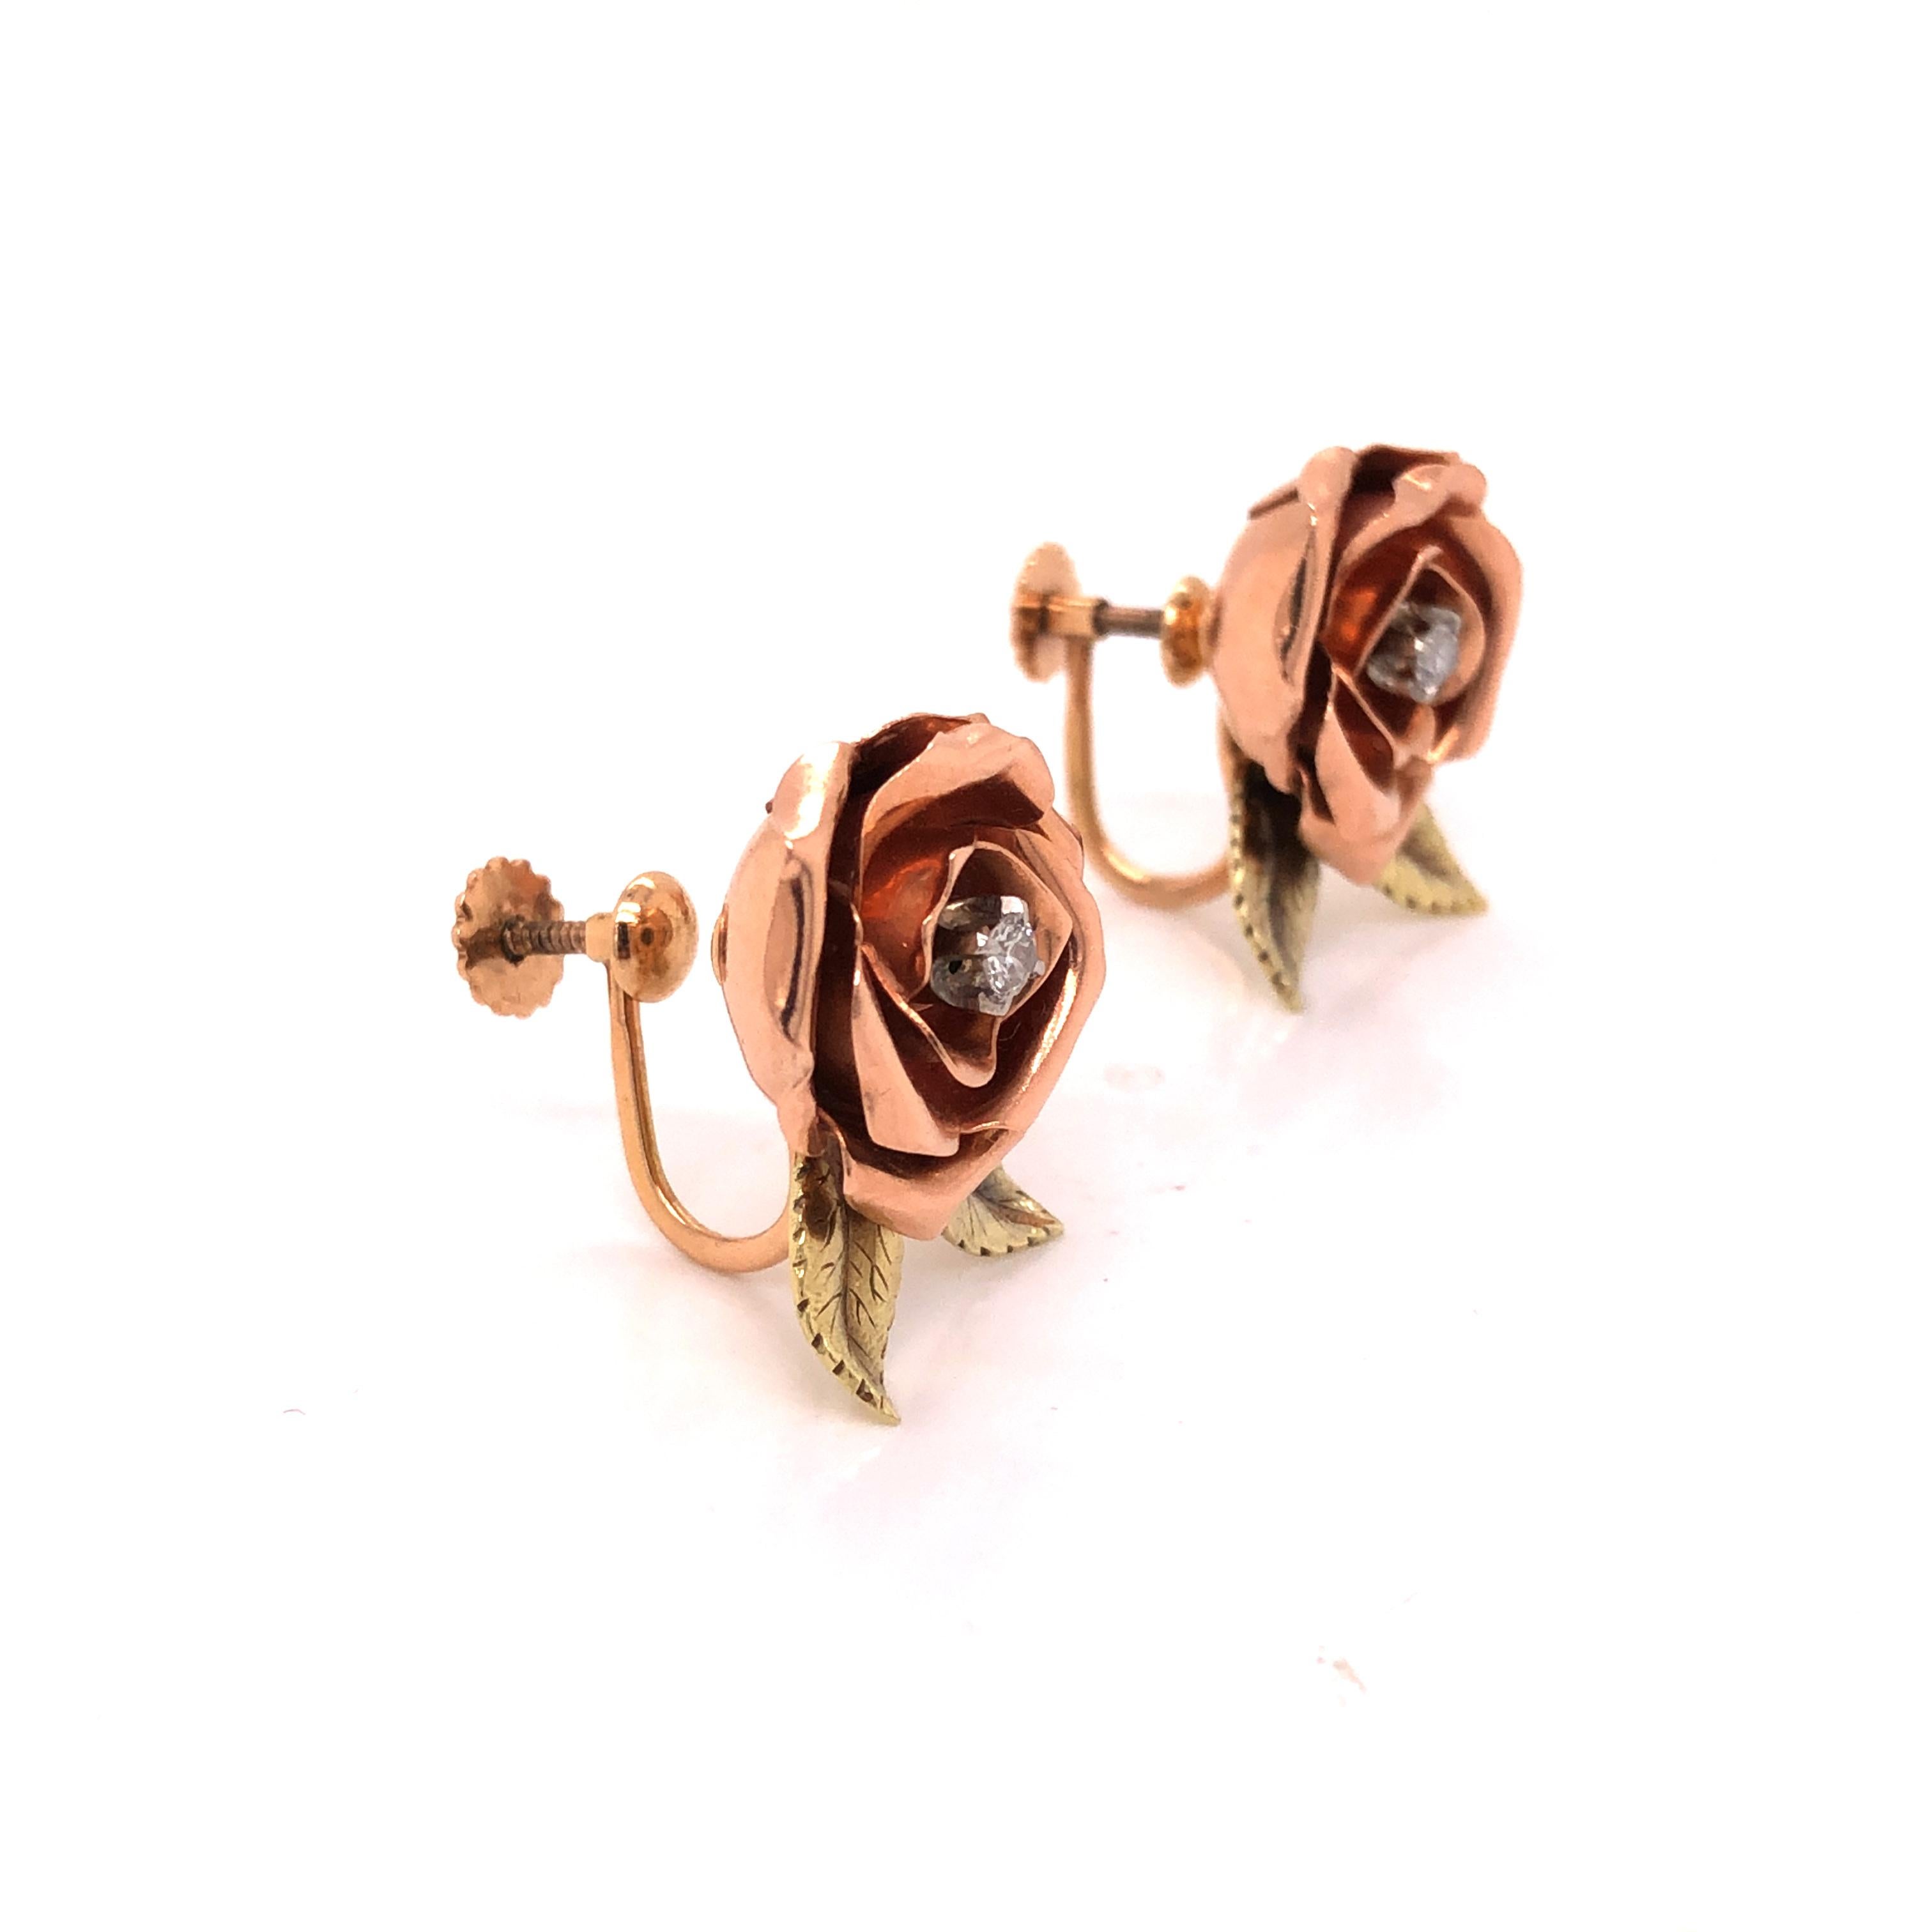 A lovely pair of vintage screw back 14K Rose and Yellow Gold Diamond Rose Earrings containing two round brilliant cut diamonds weighing approximately 0.13 carat total.

Weight: 7.9 grams
